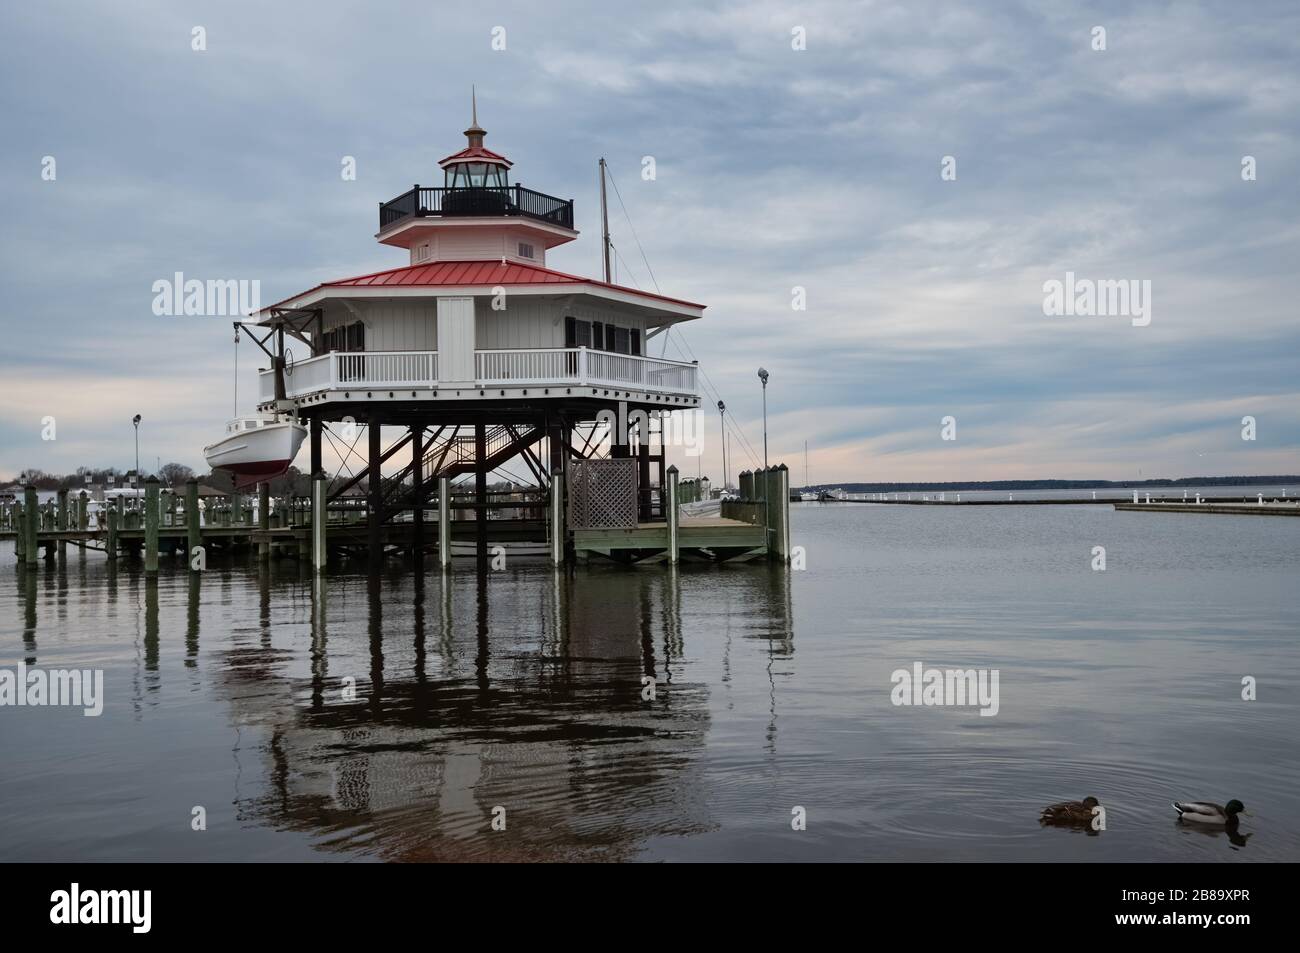 Built in 2012, the Choptank River Lighthouse is located on the waterfront in Cambridge, Maryland. Stock Photo